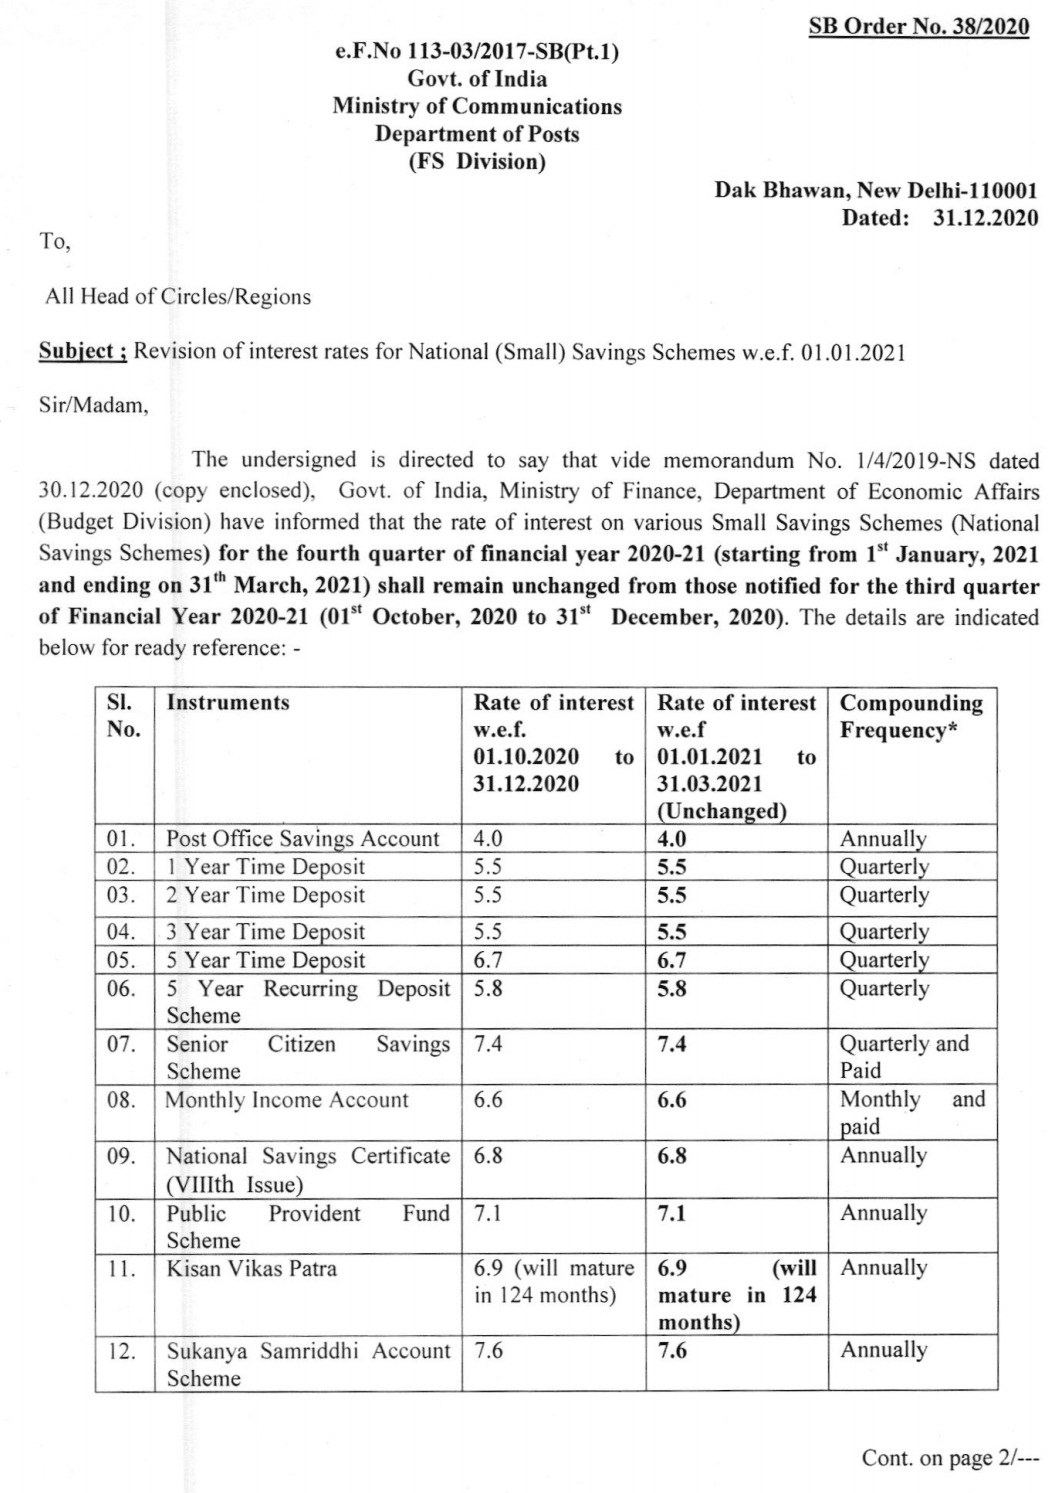 SB Order No: 38/2020 | Revision of interest rates for National (Small) Savings Schemes